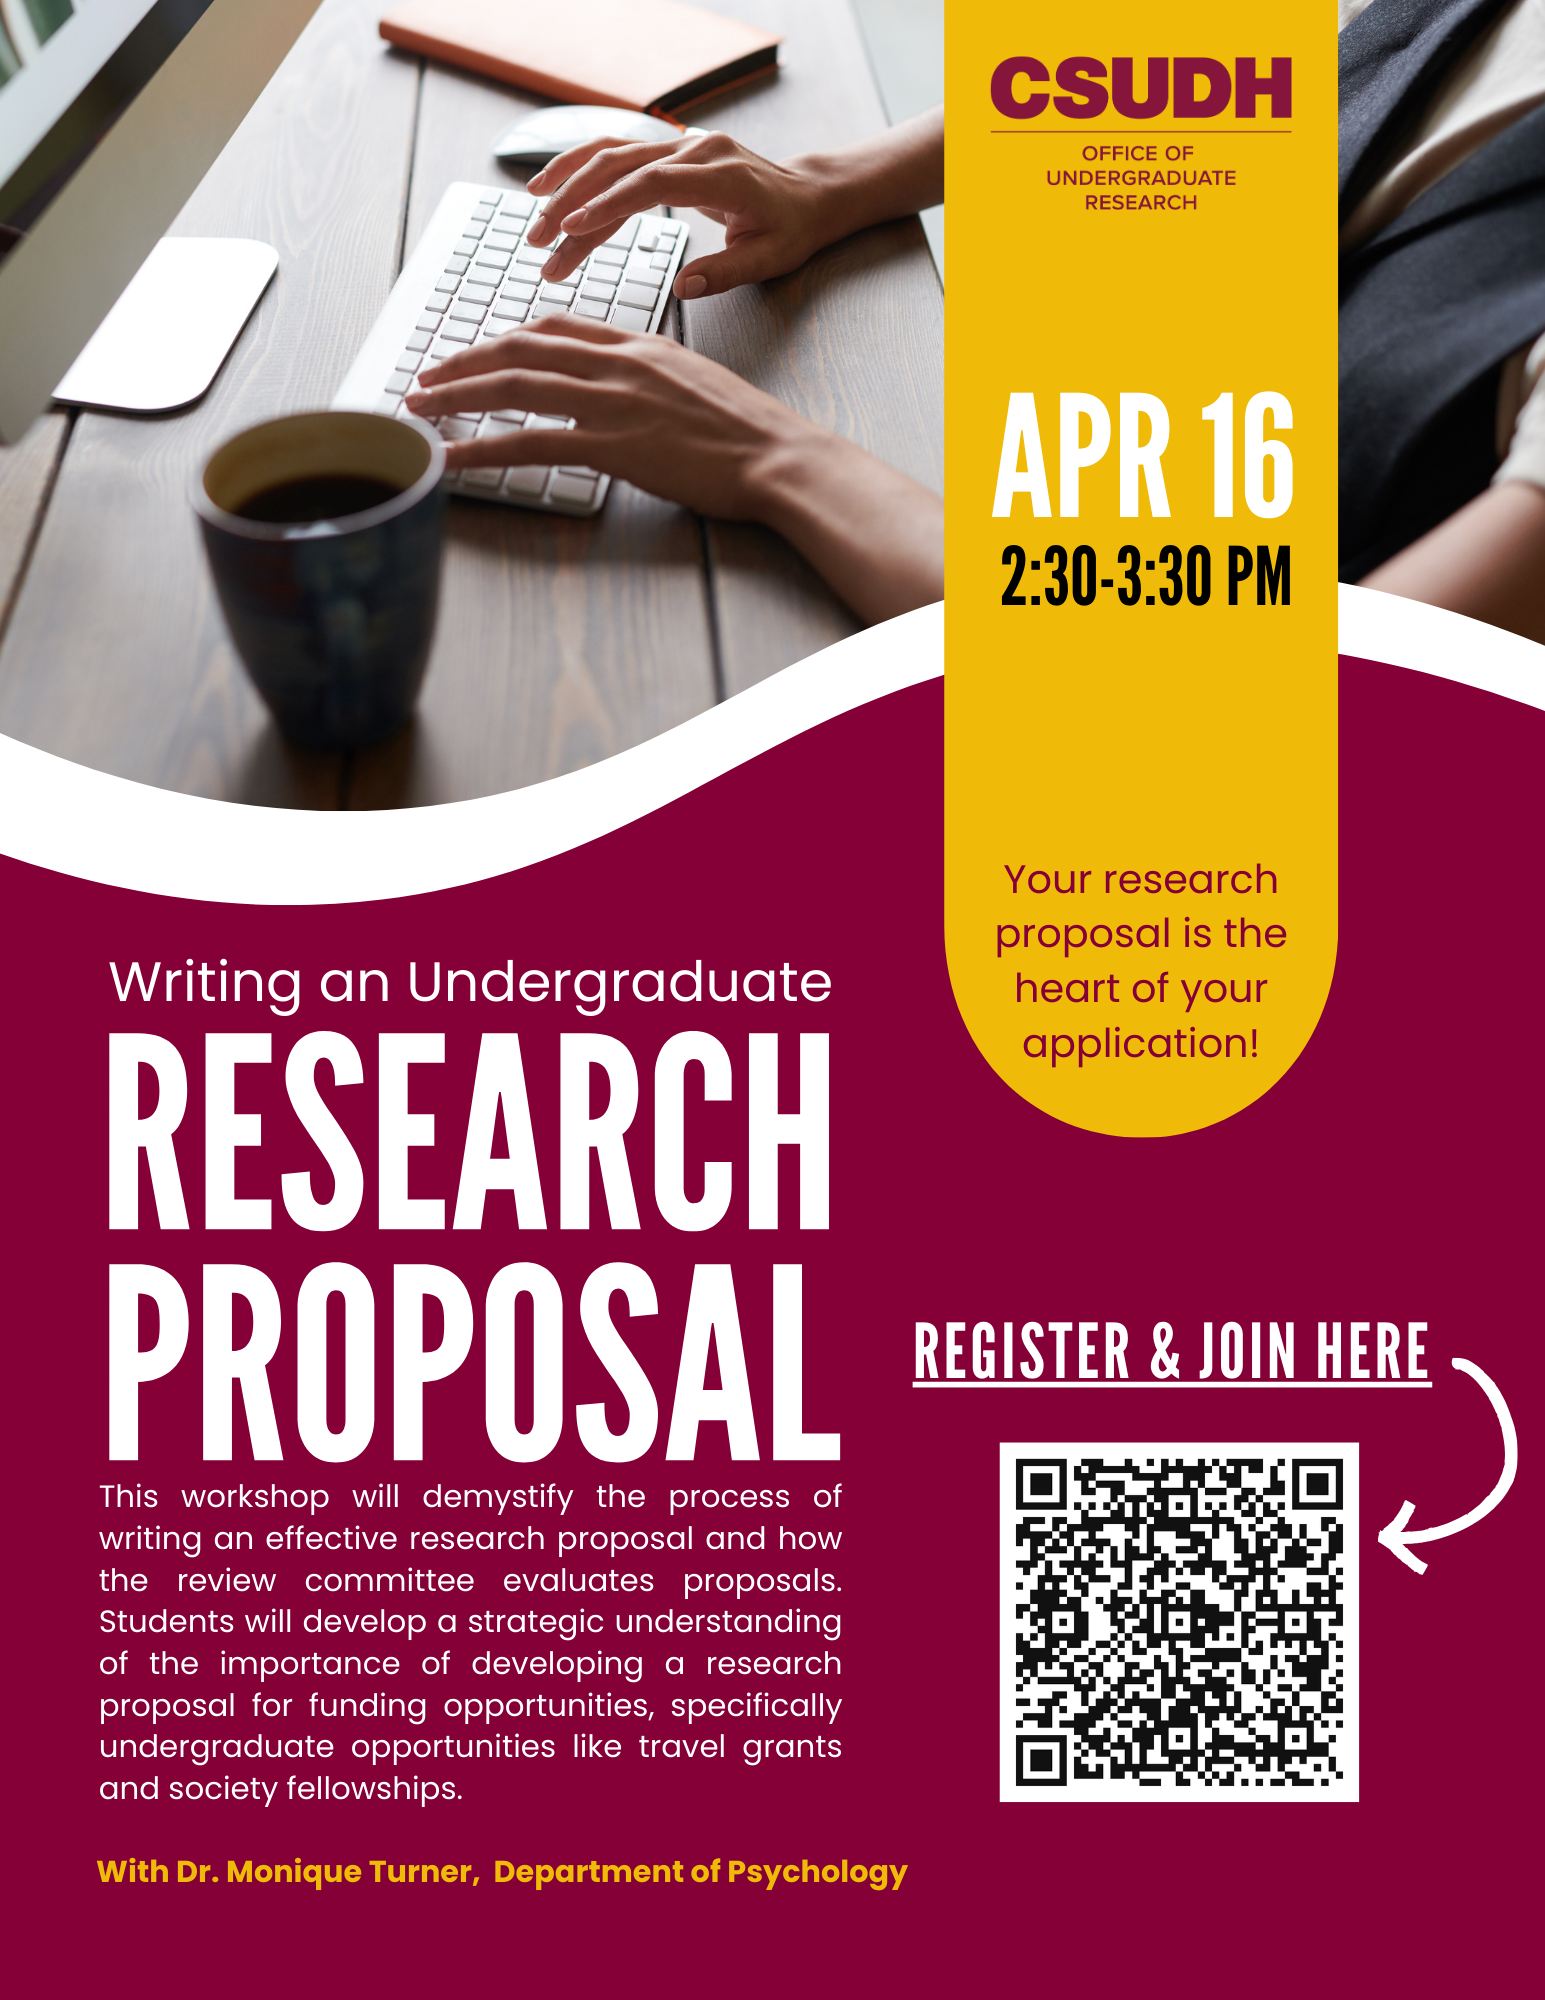 Writing a Research Proposal Flyer 